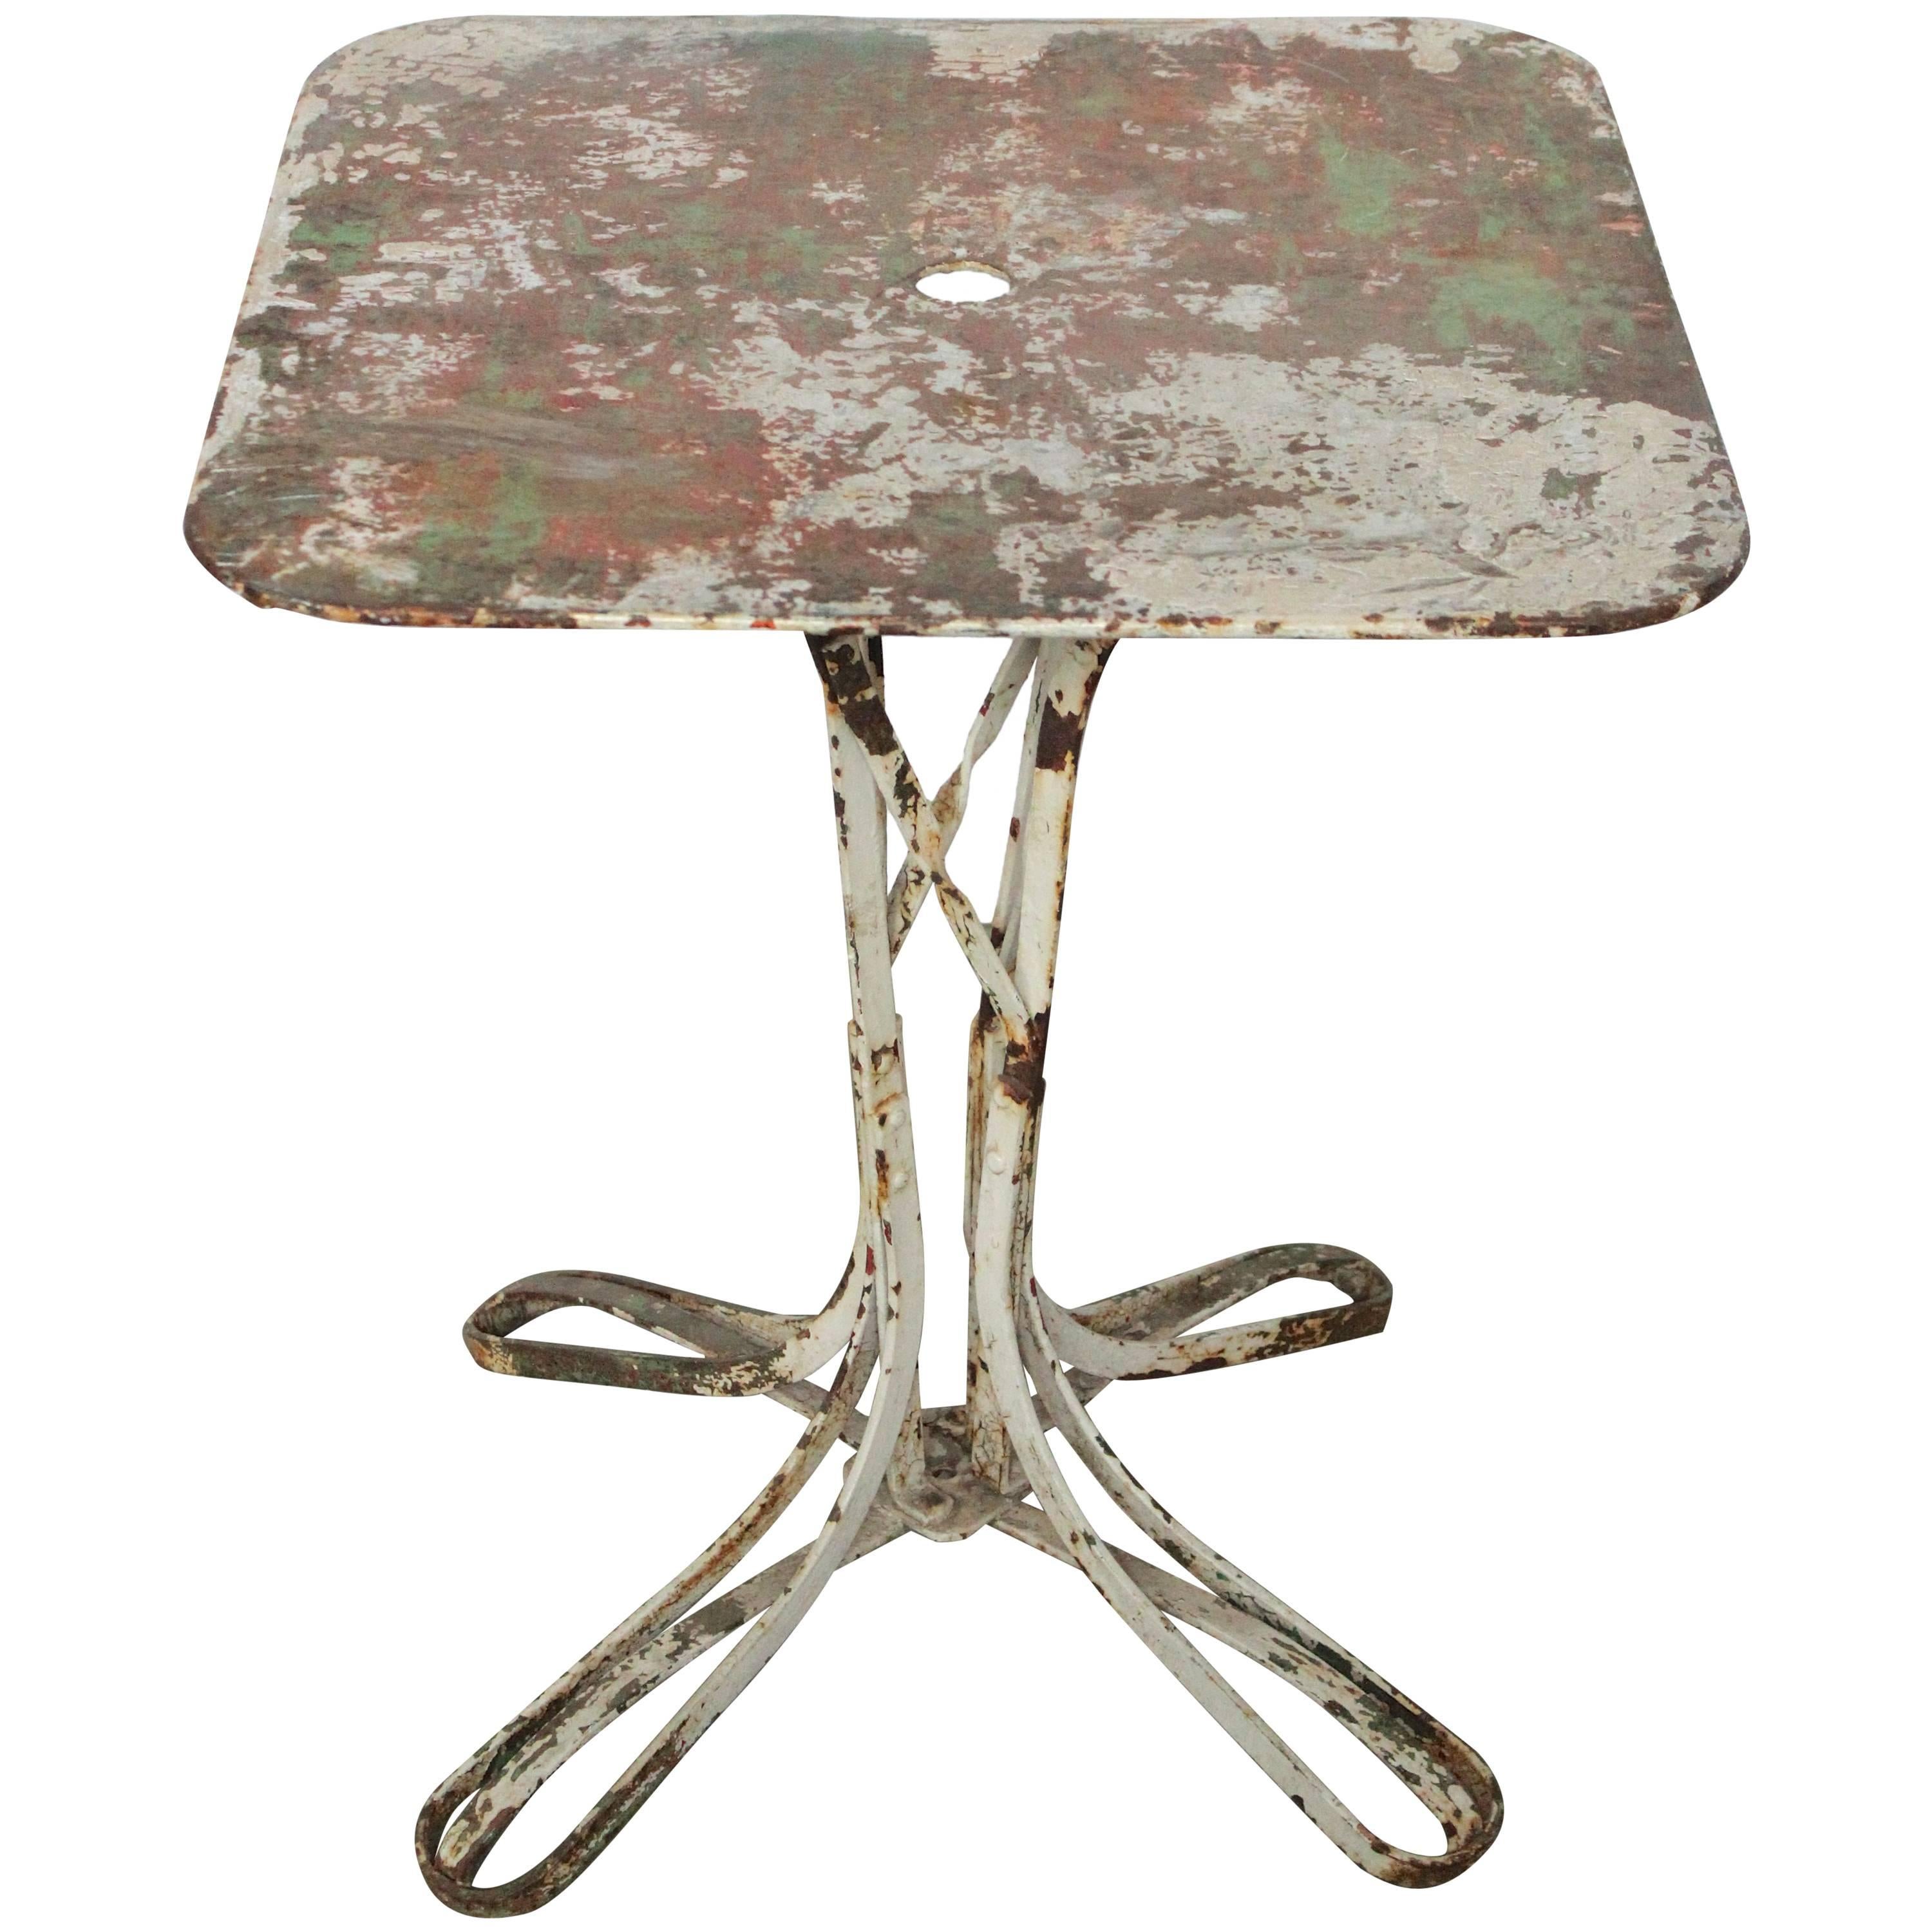 French Garden Table with Distressed Paint Finish